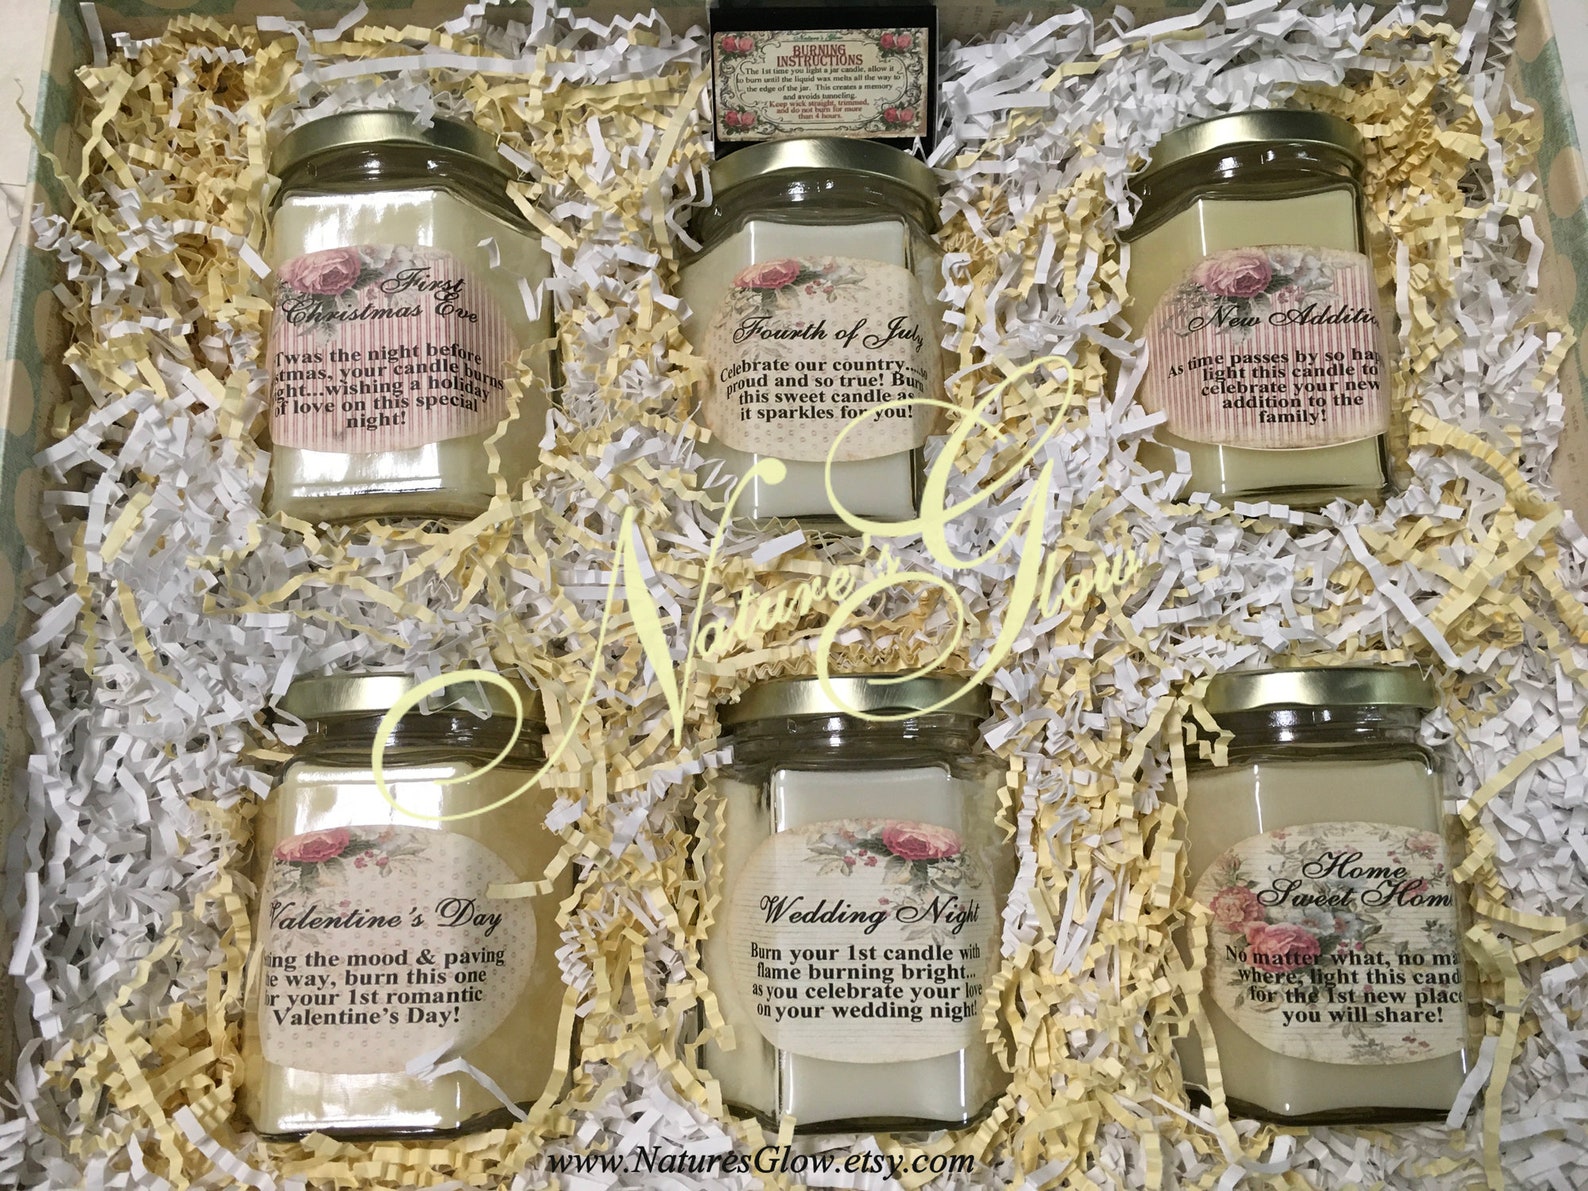 Bridal Shower Gift with Candle Poem Candle Gift Set Marriage | Etsy